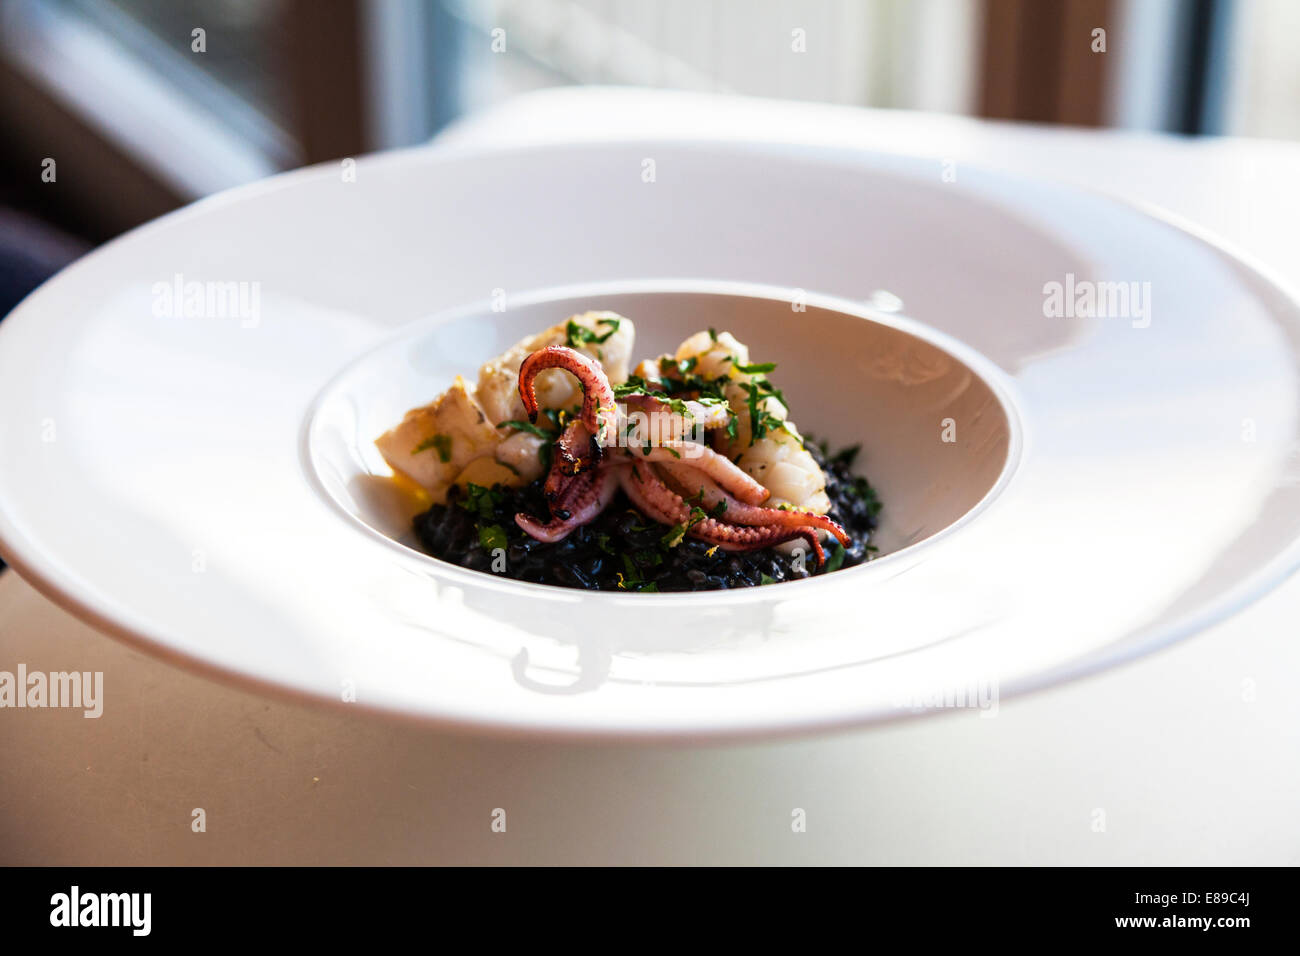 Squid meal food Fifteen Jamie Oliver's Cornwall Cornish west country typical Stock Photo